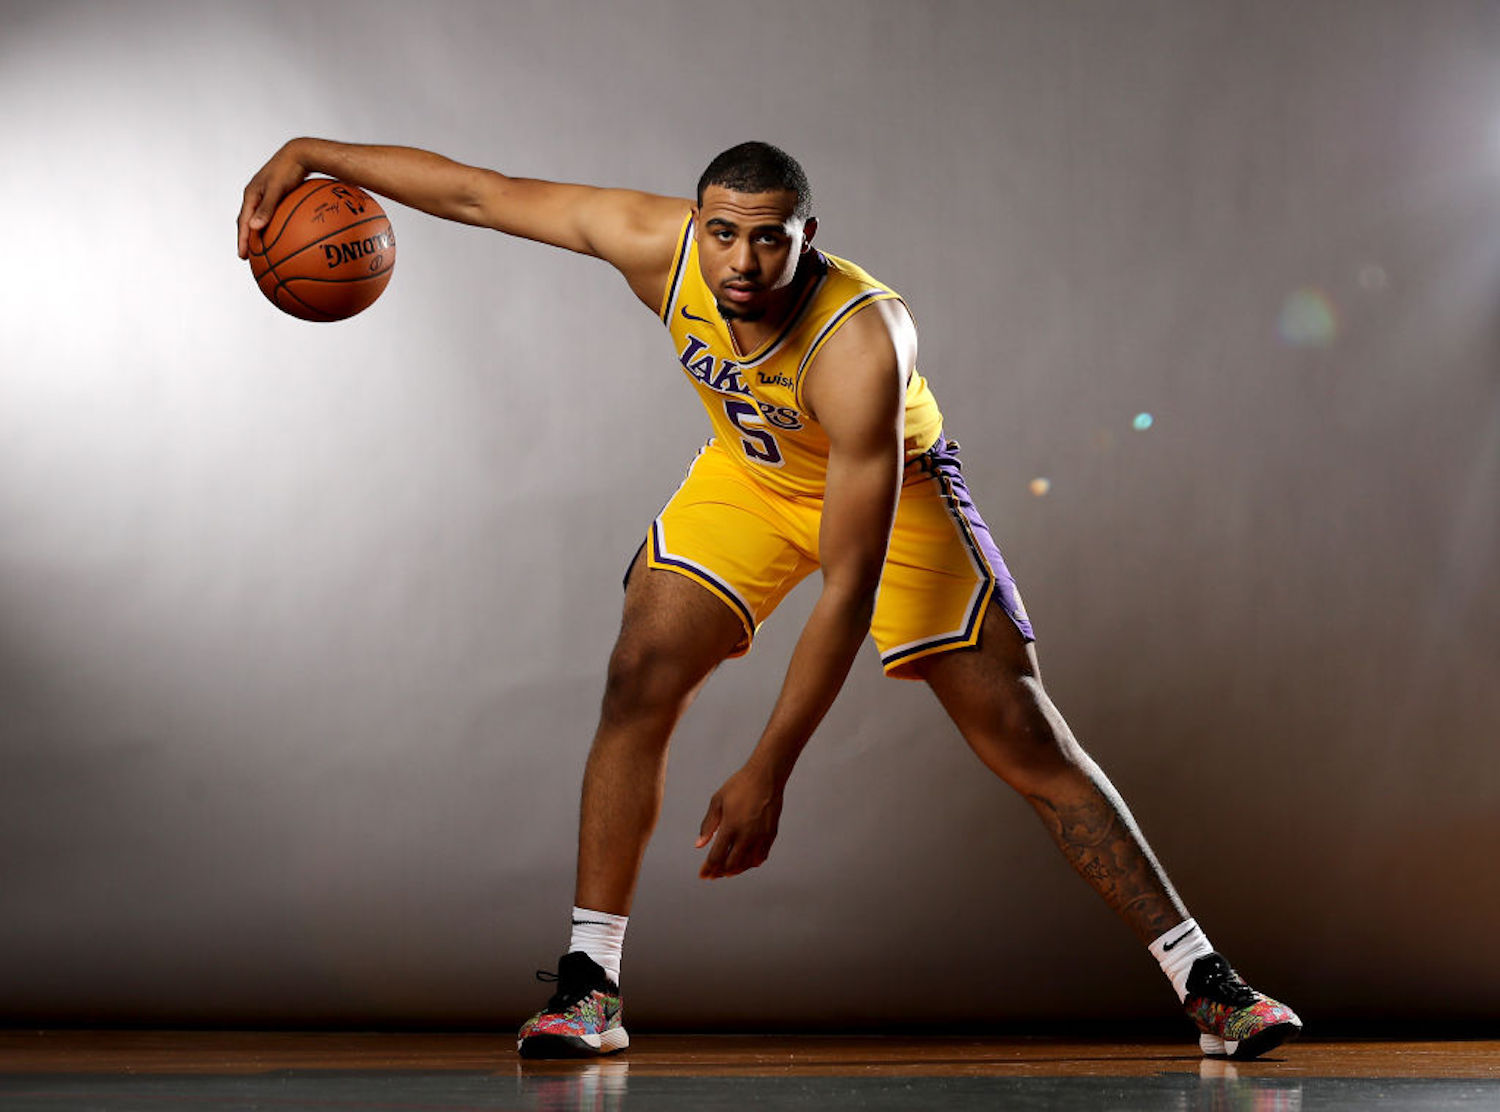 Talen Horton-Tucker is looking like a breakout star for the Los Angeles Lakers, but LeBron James had his eyes on him since high school.